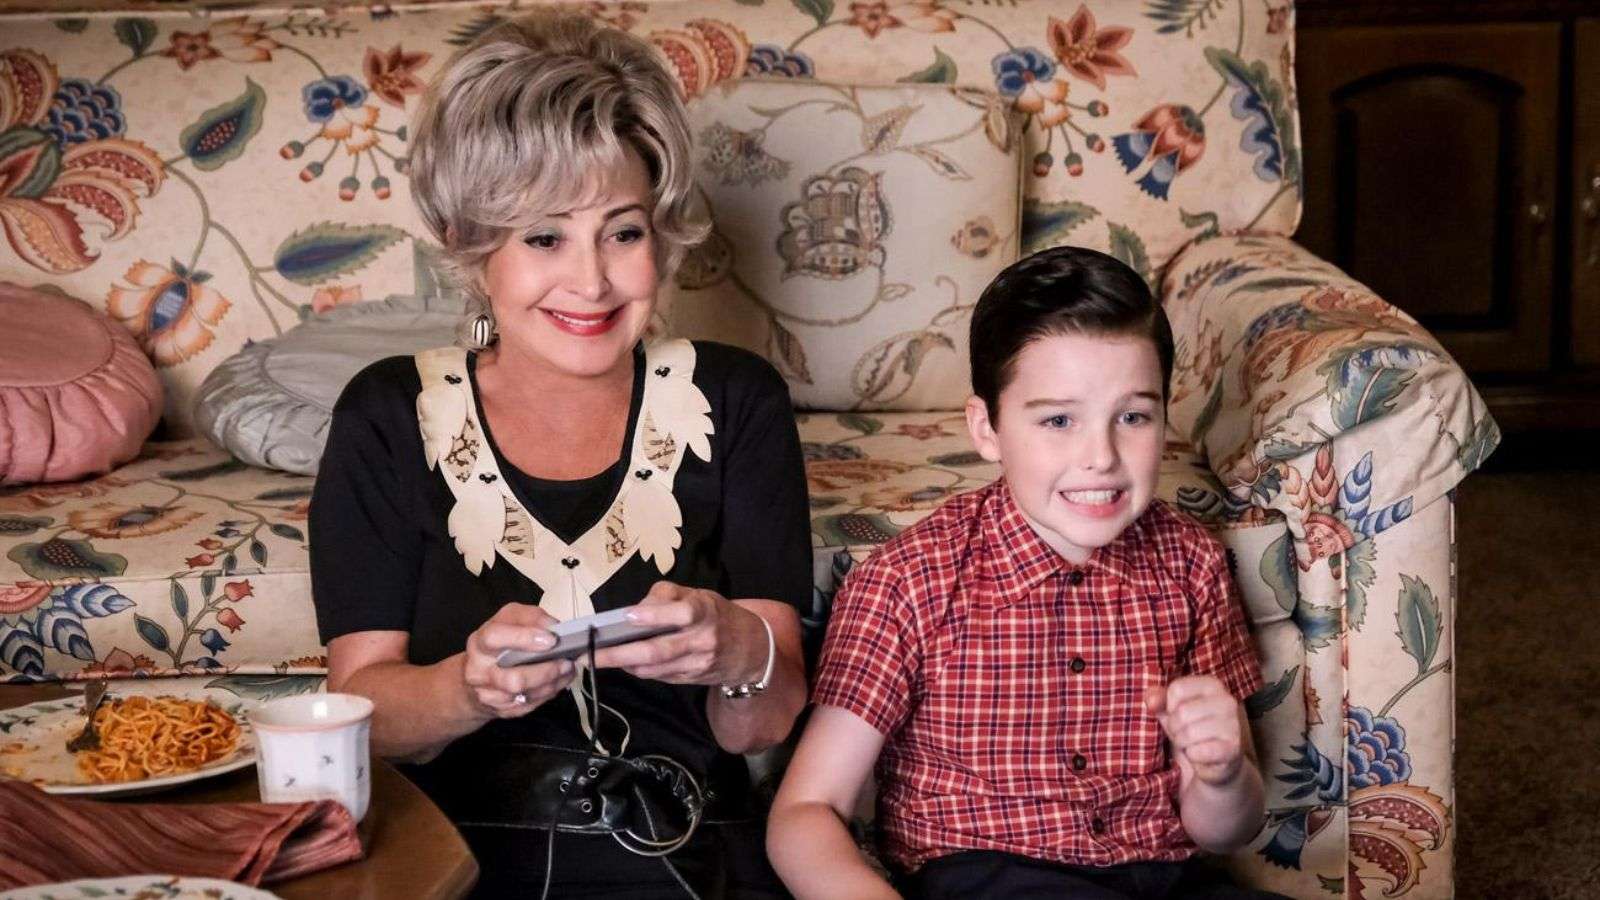 Meemaw and Sheldon playing video games on the floor in Young Sheldon.